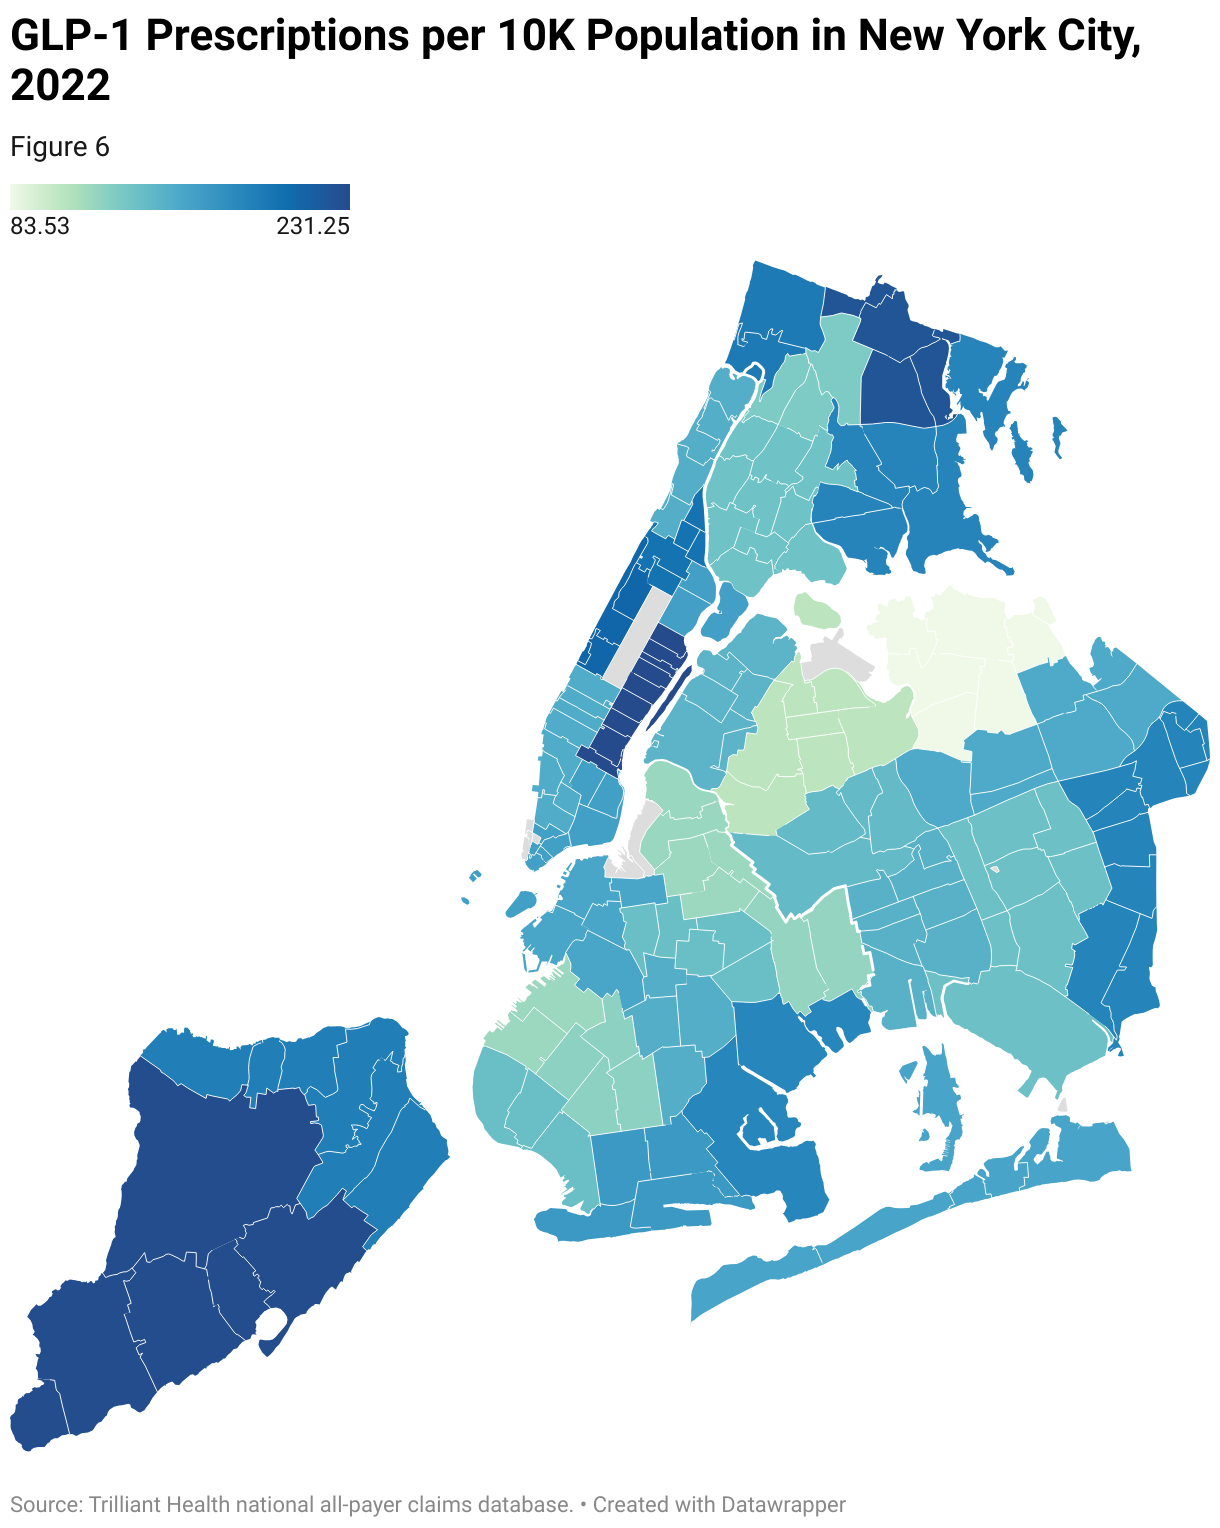 A map of New York City shows the number of GLP-1 prescriptions per 10,000 population, with utilization highest in the Upper East Side neighborhood.